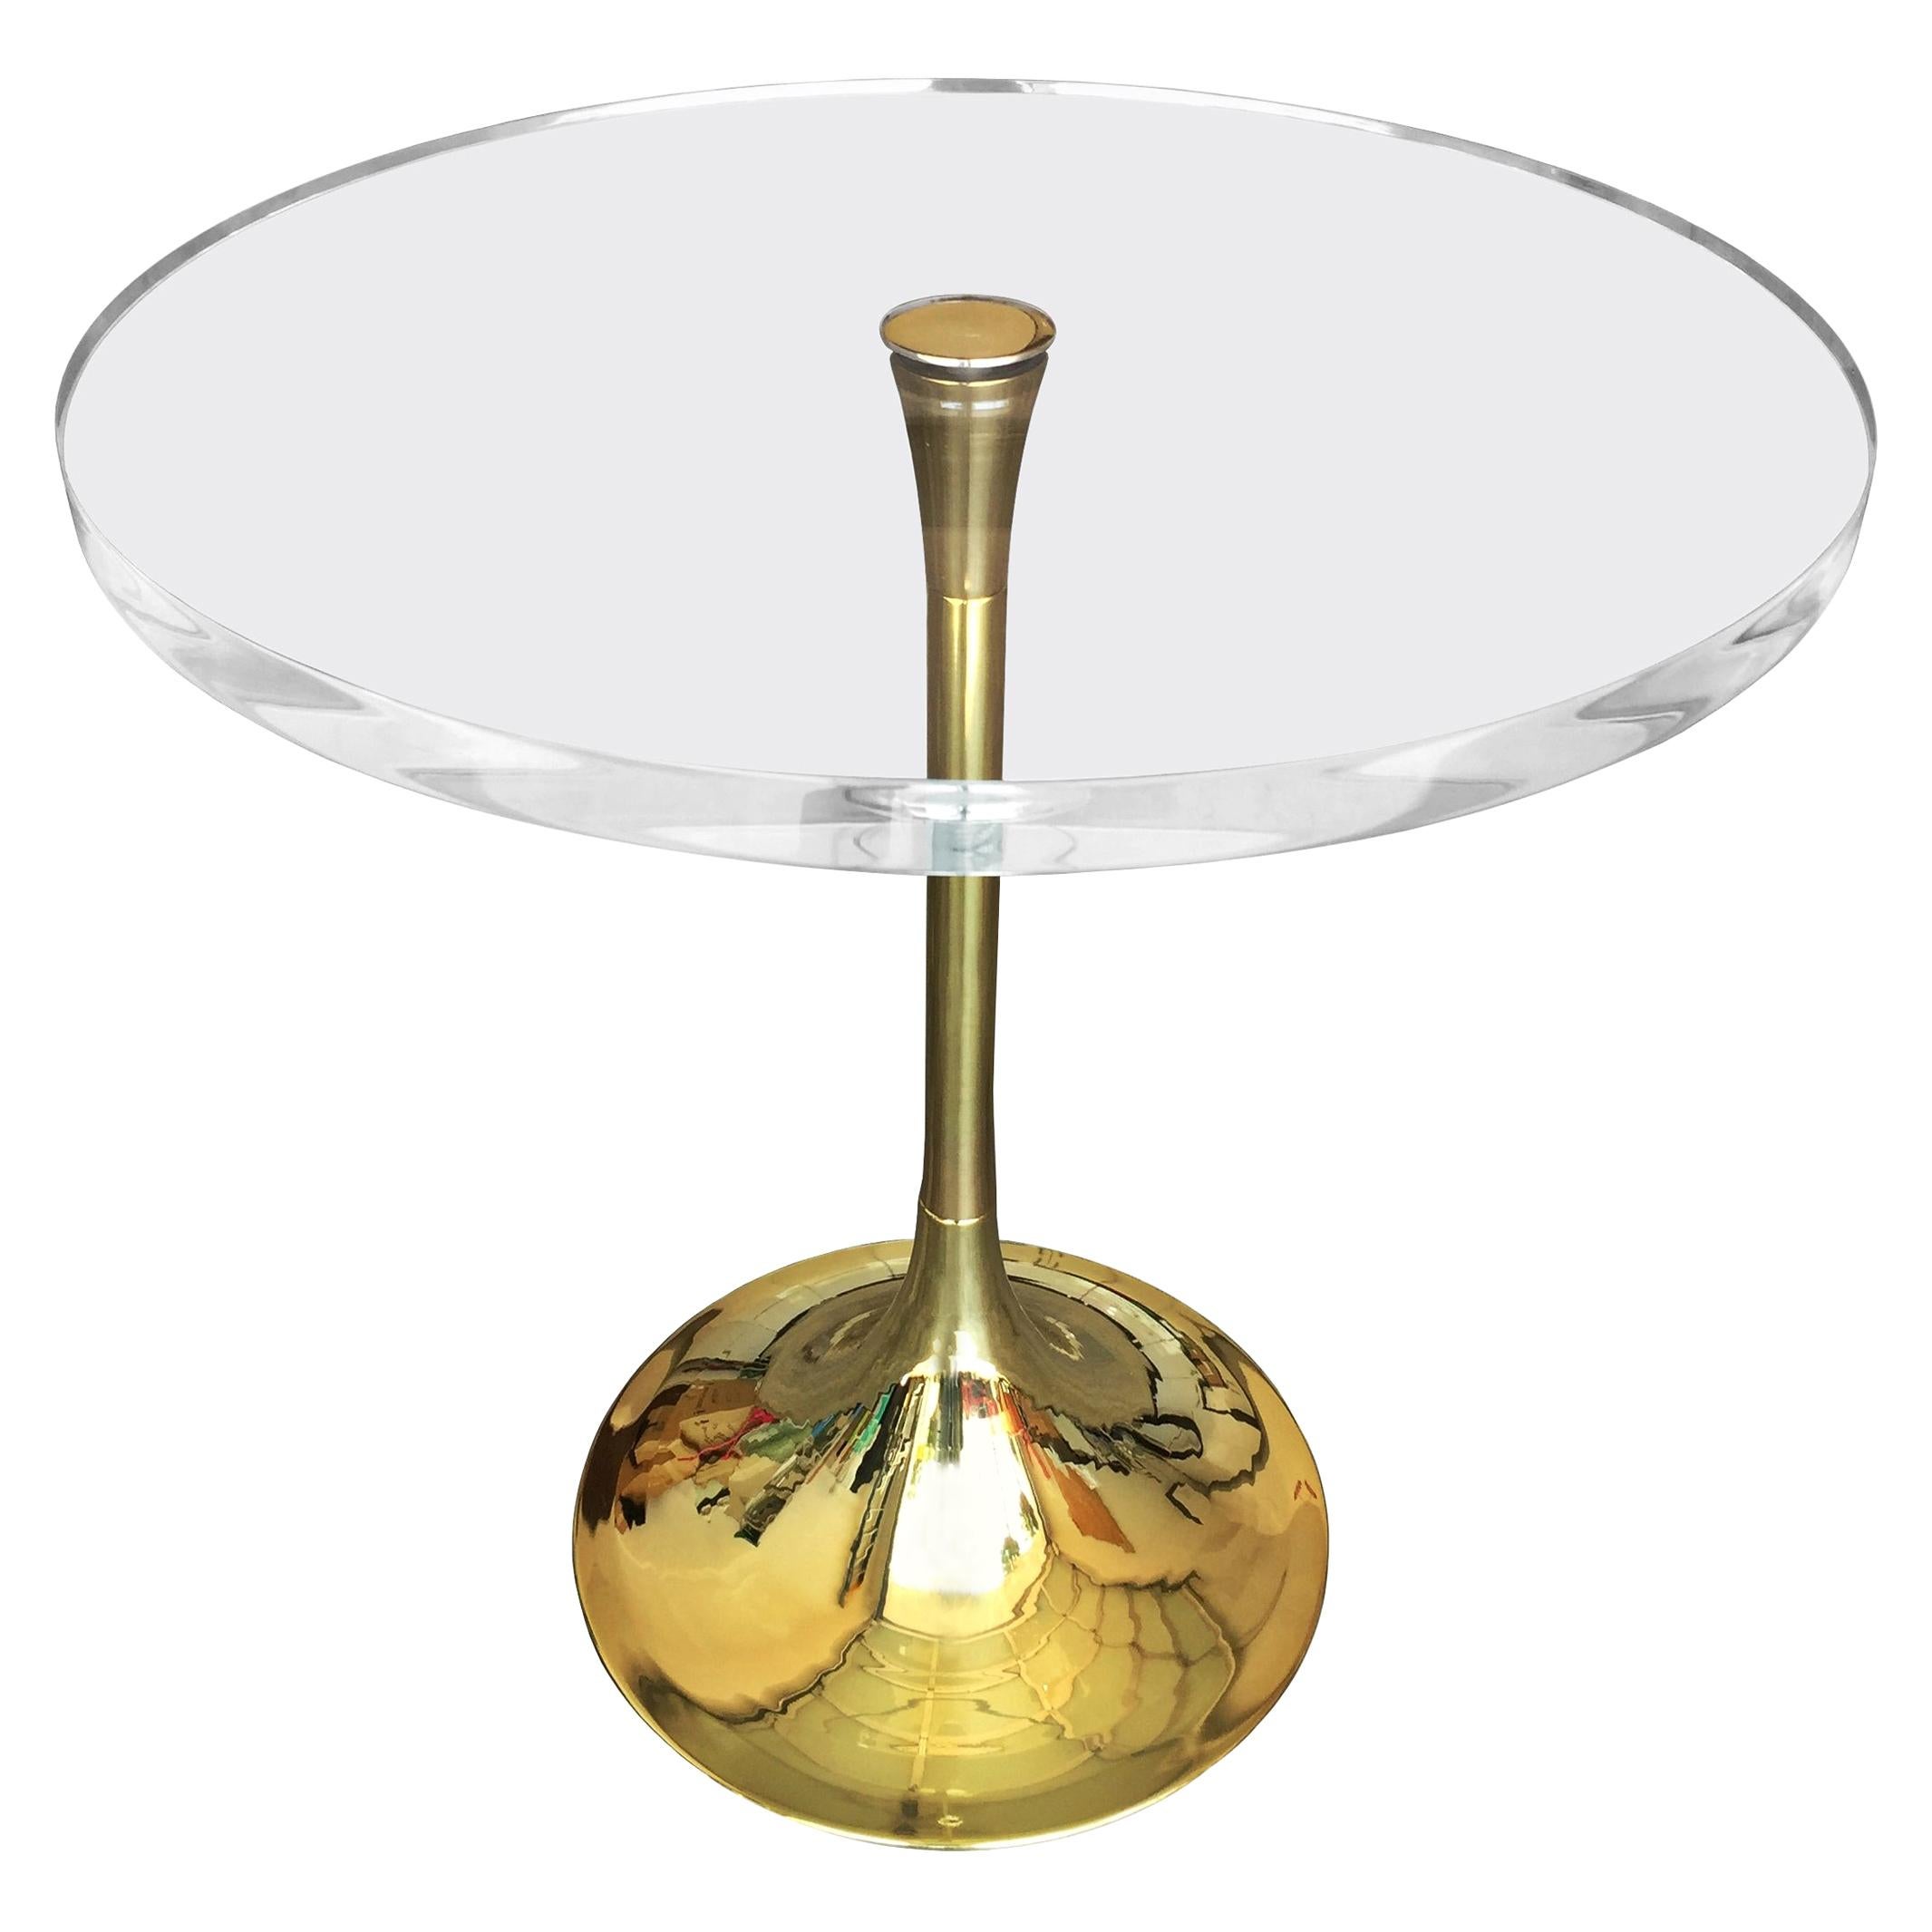 Charles Hollis Jones "Bugle" Base Side Table in Brass and Lucite For Sale